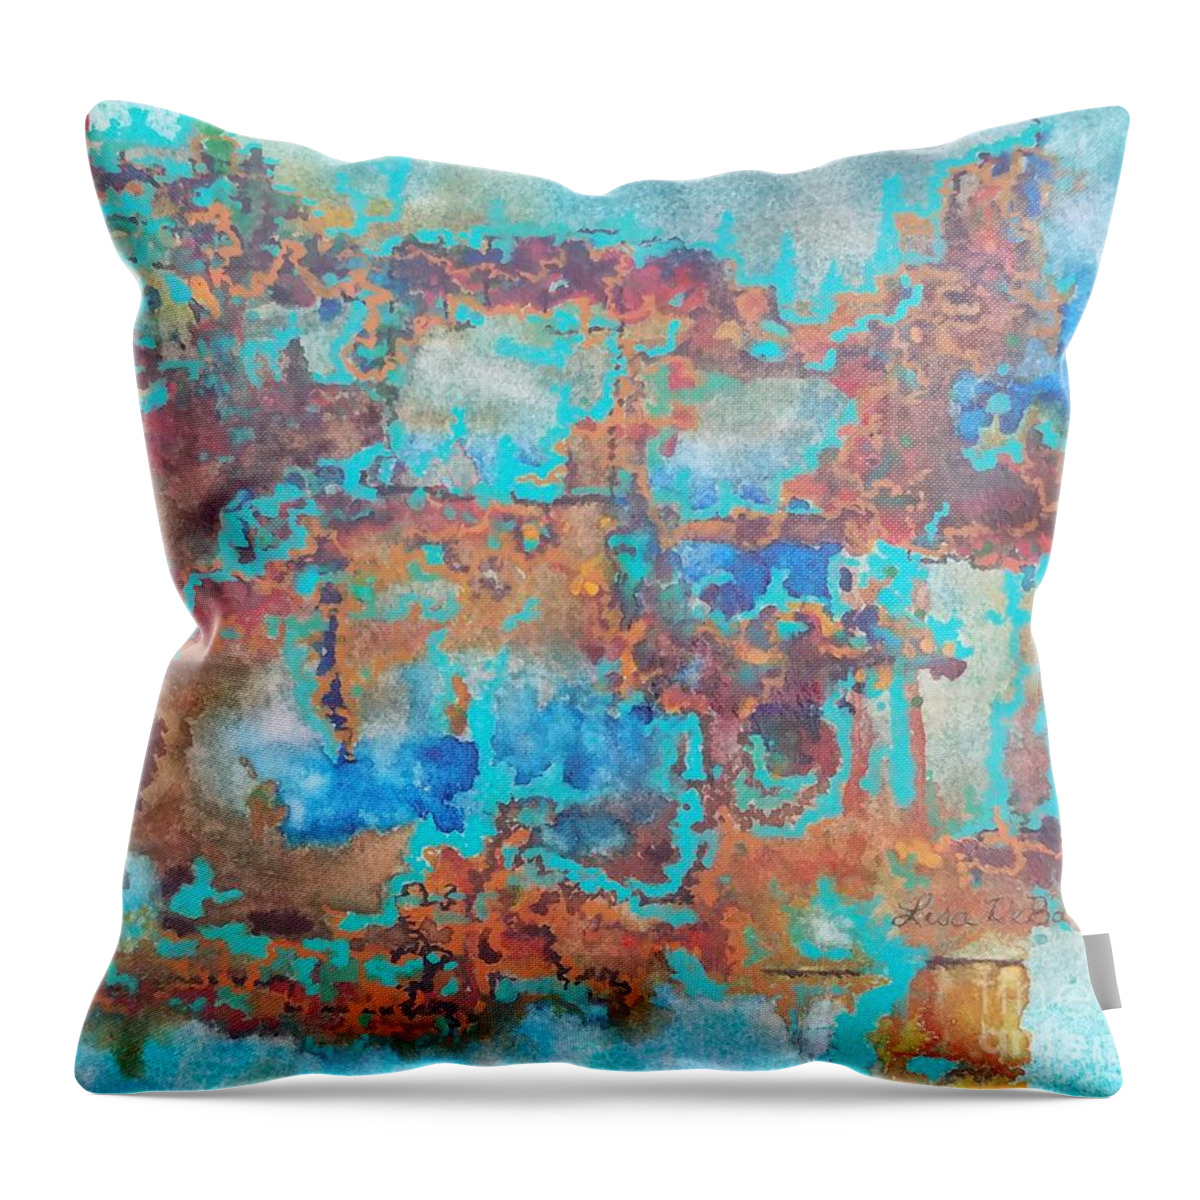 Abstract Throw Pillow featuring the painting Labyrinth by Lisa Debaets